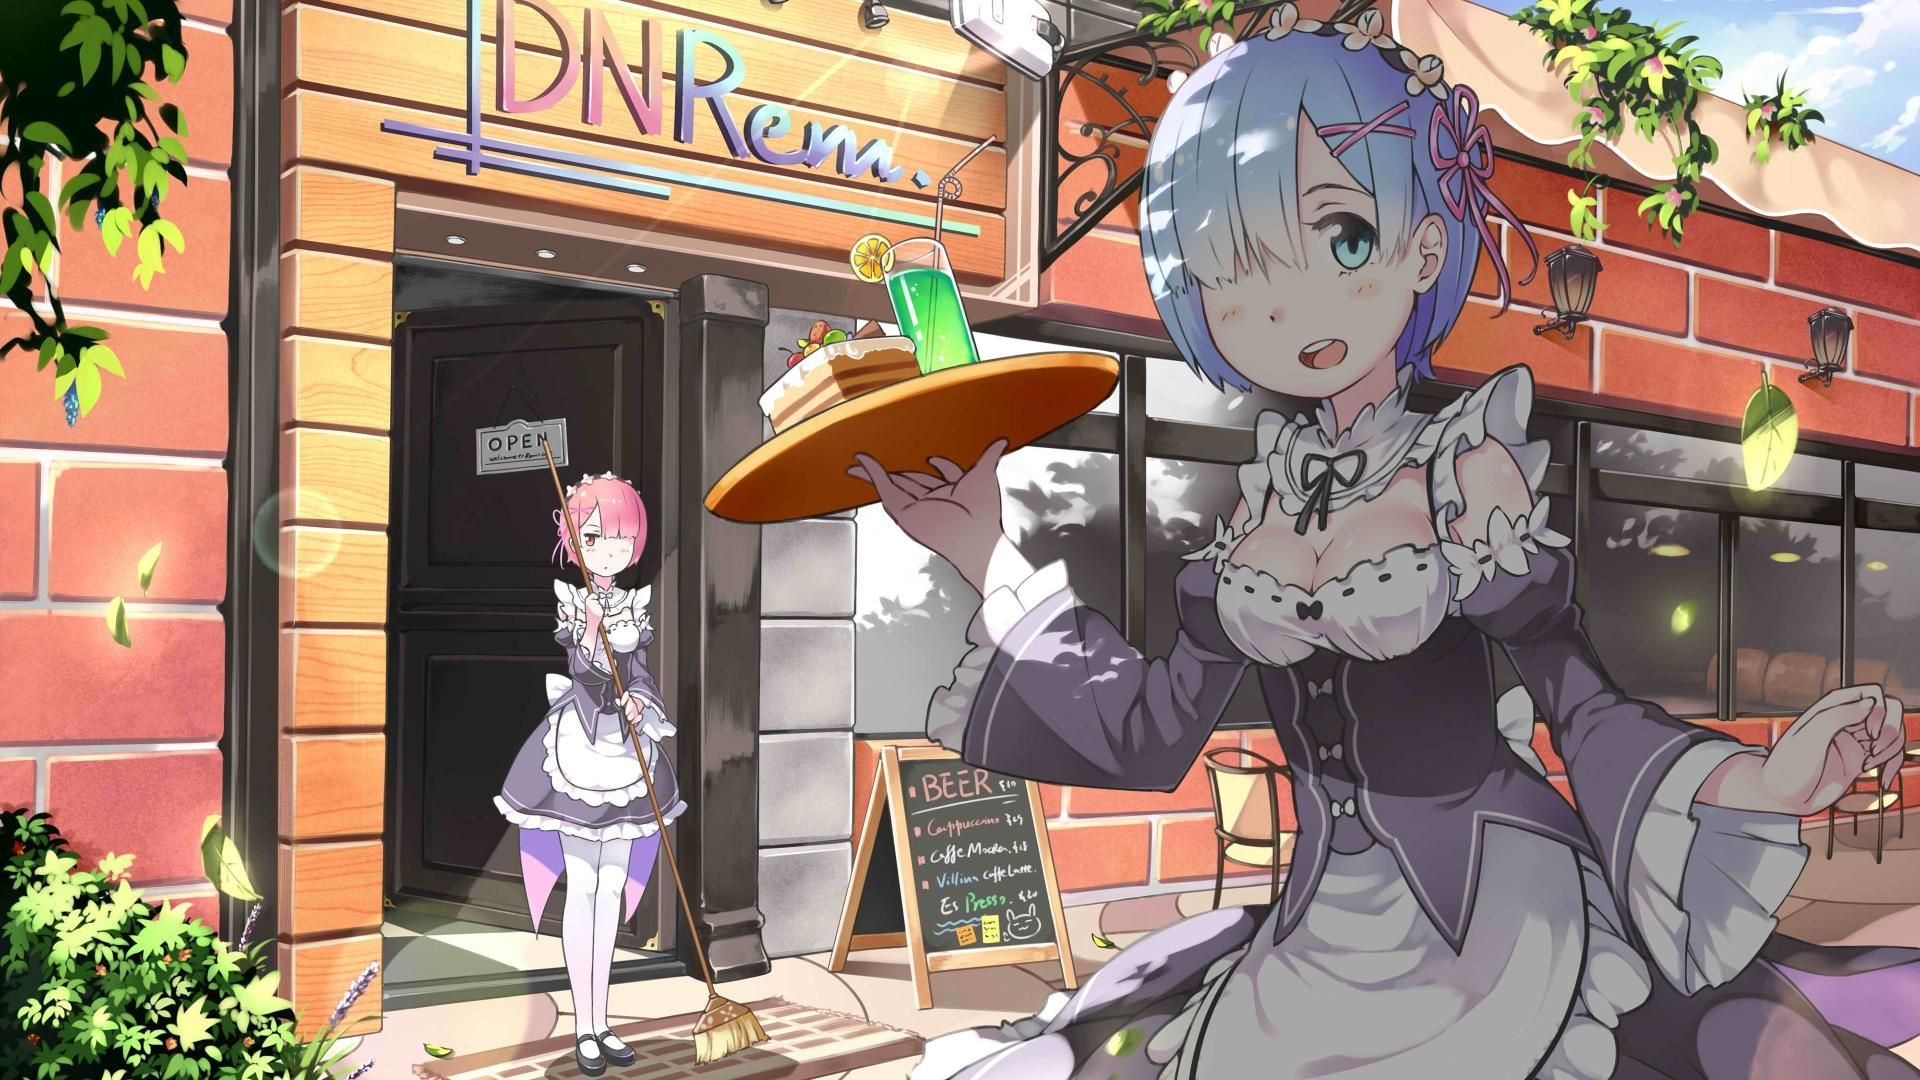 Zero Maid Cafe HD Wallpaper From Gallsource.com. Anime, Nghệ thuật anime, Nghệ thuật